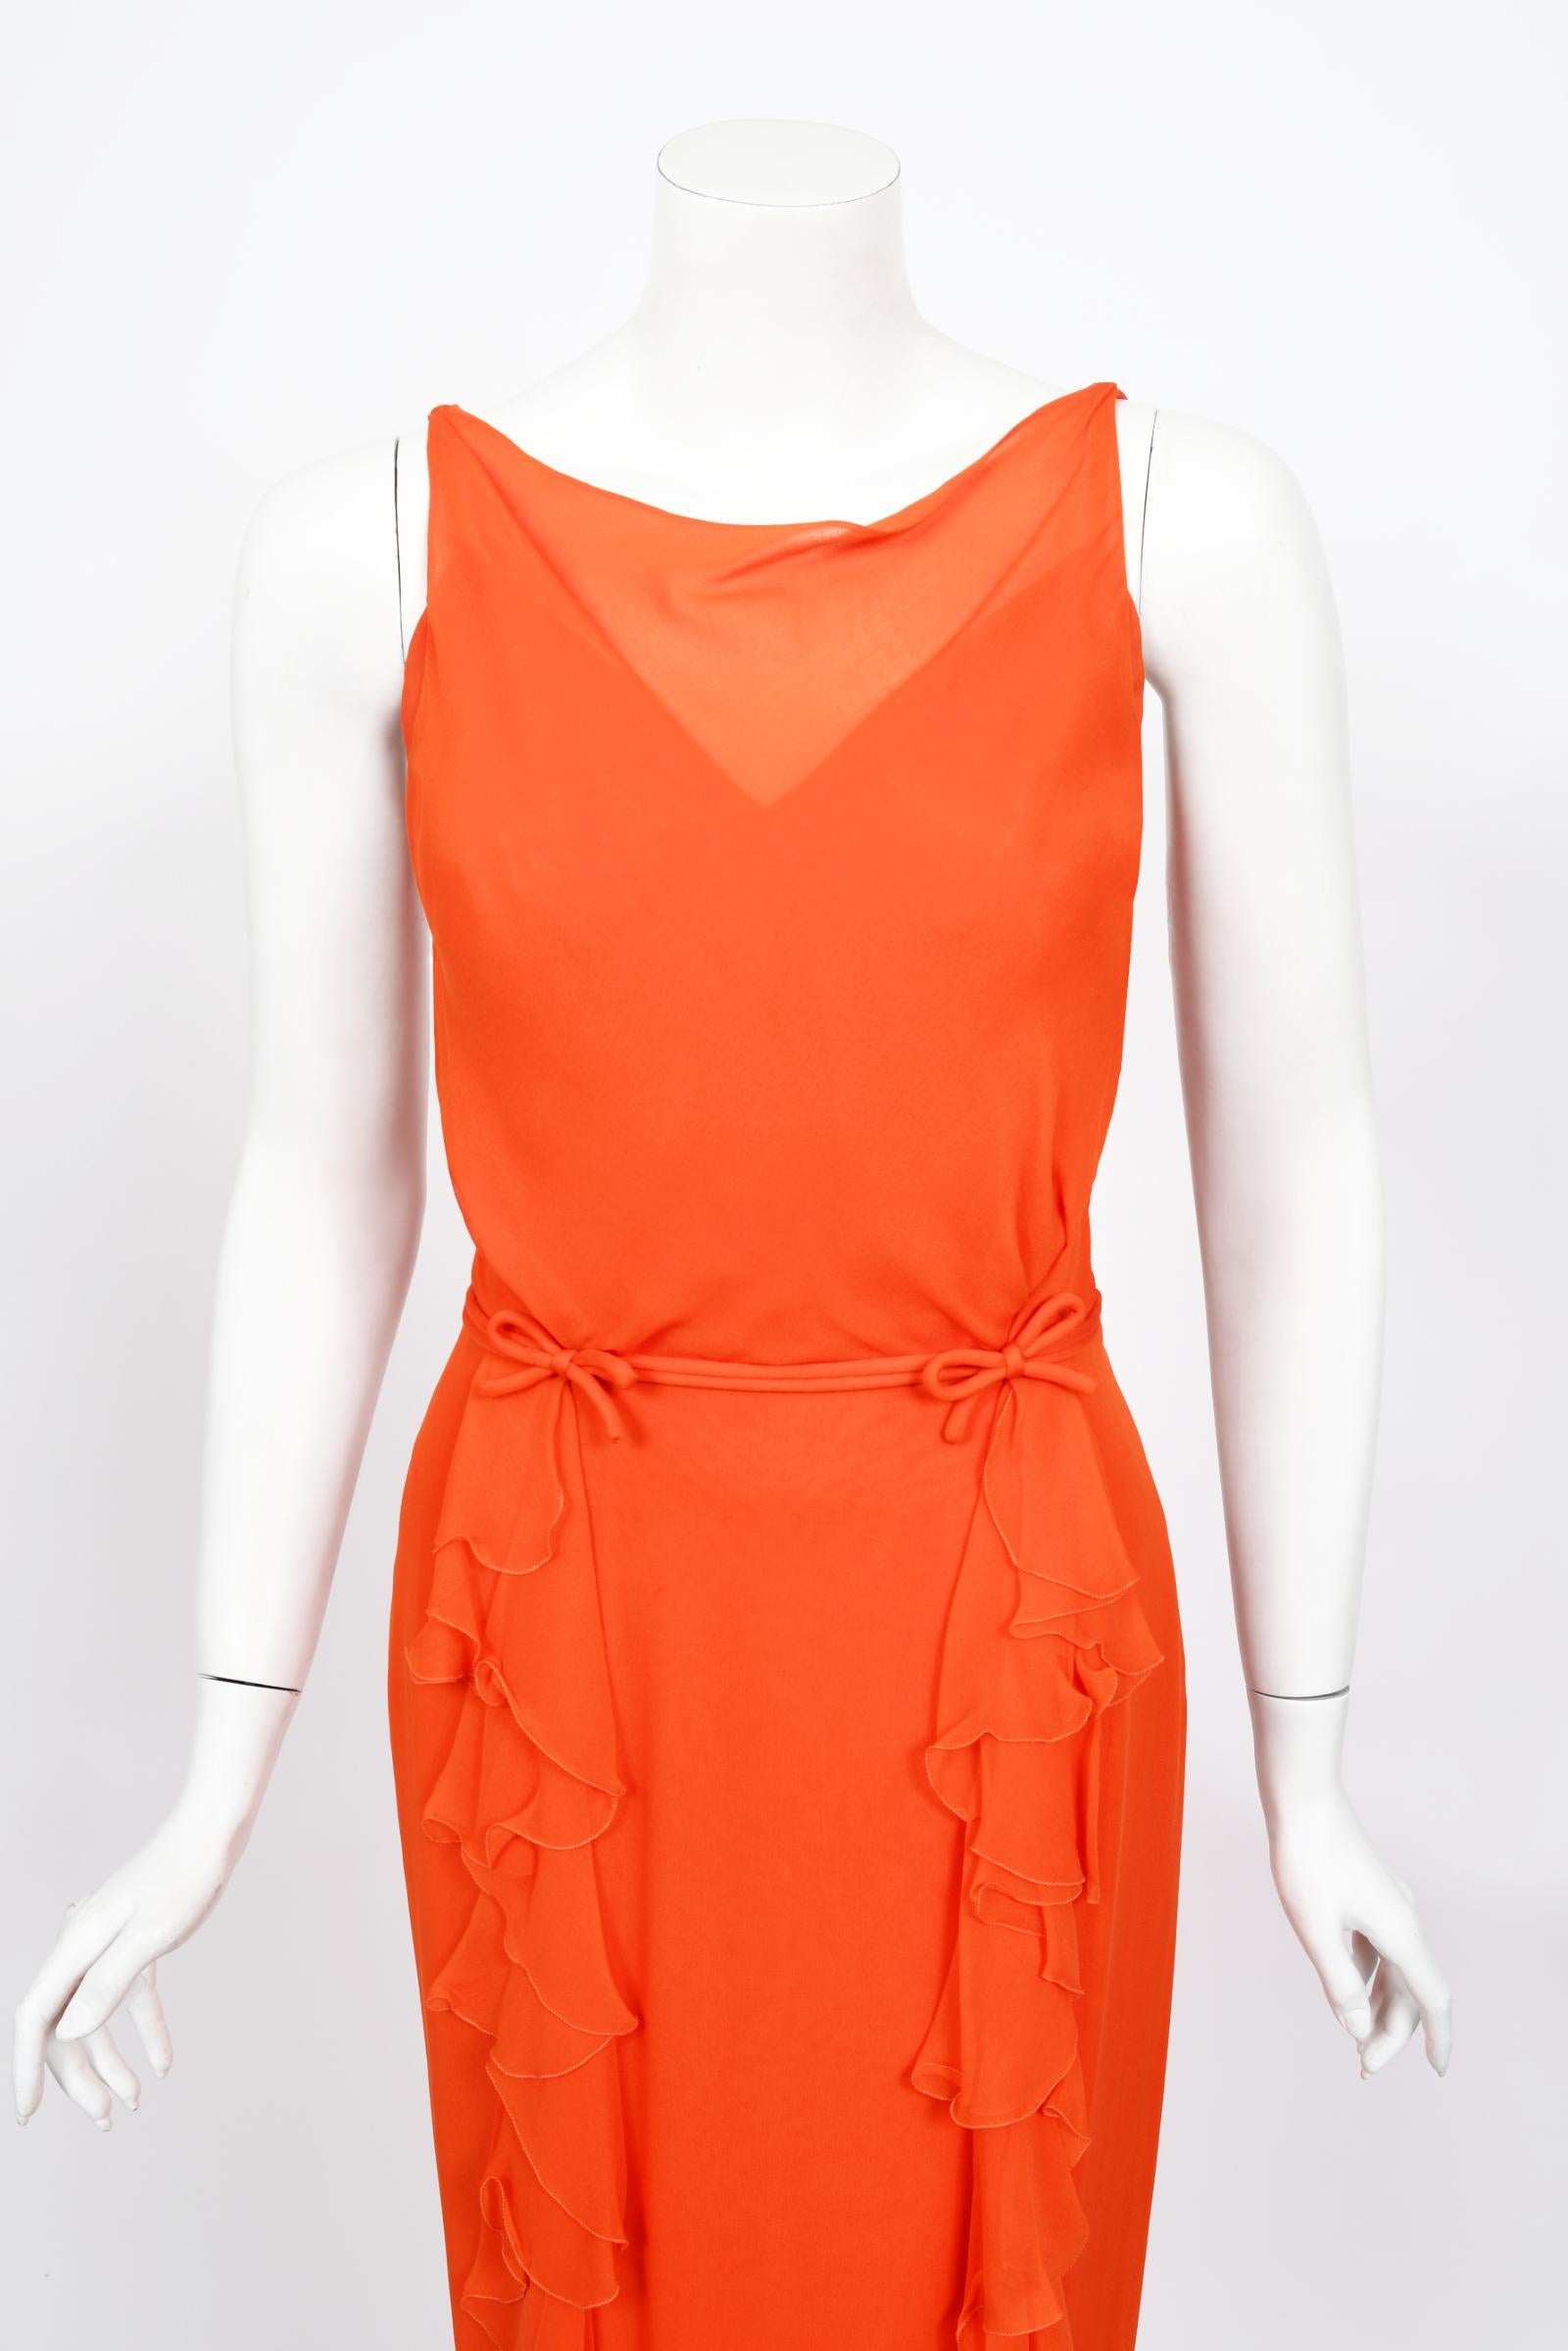 An incredibly chic and ultra rare Helen Rose couture vibrant orange semi-sheer silk chiffon hourglass gown ensemble dating back to the mid 1960's. Helen Rose won two Academy Awards for Best Costume Design: 